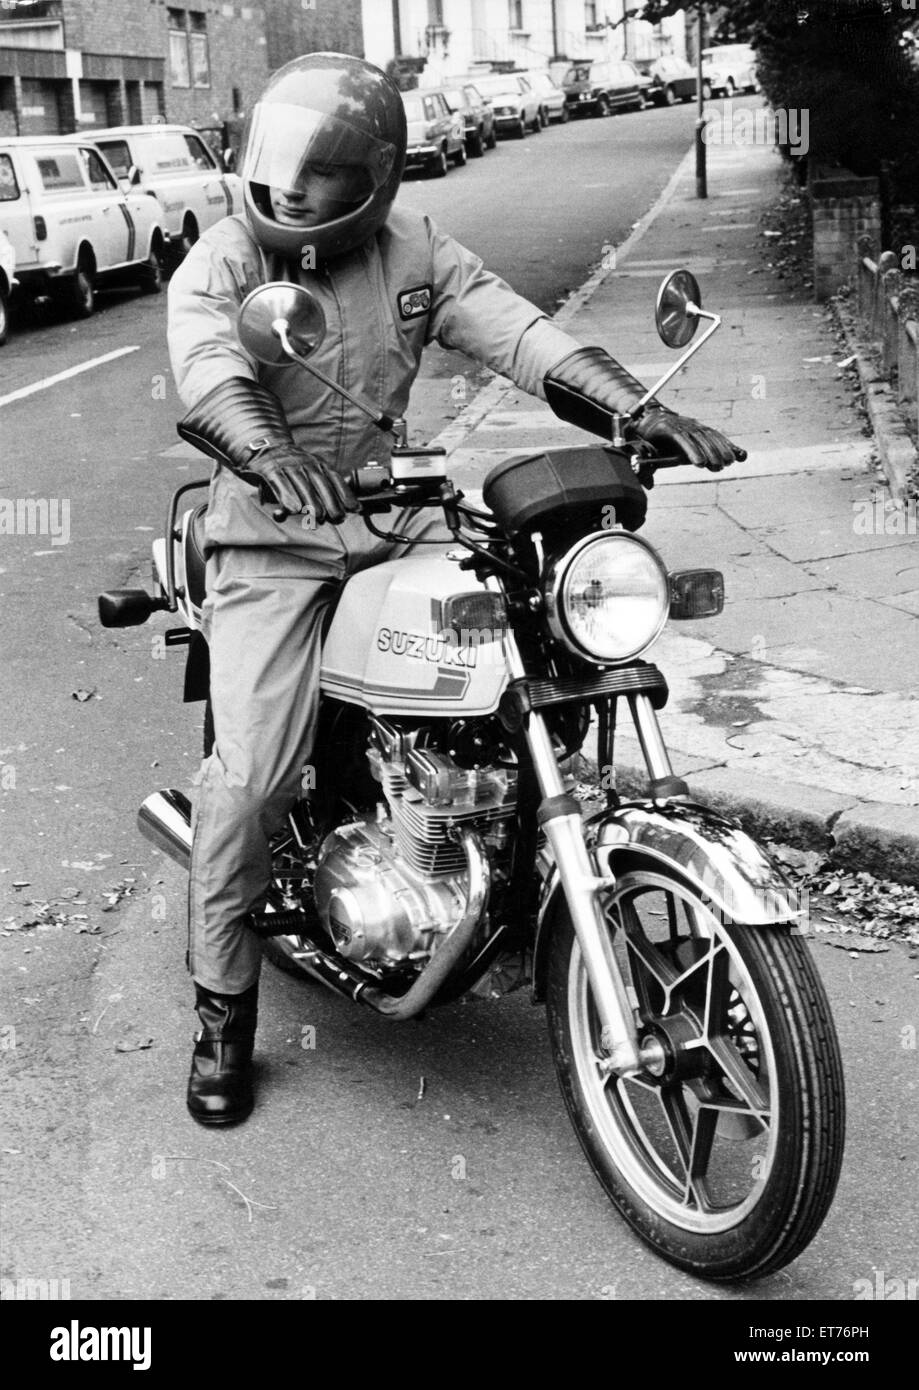 Machines like this Suzuki 250 will take on a new image when learner-rider laws change this year. Circa 1982. Stock Photo